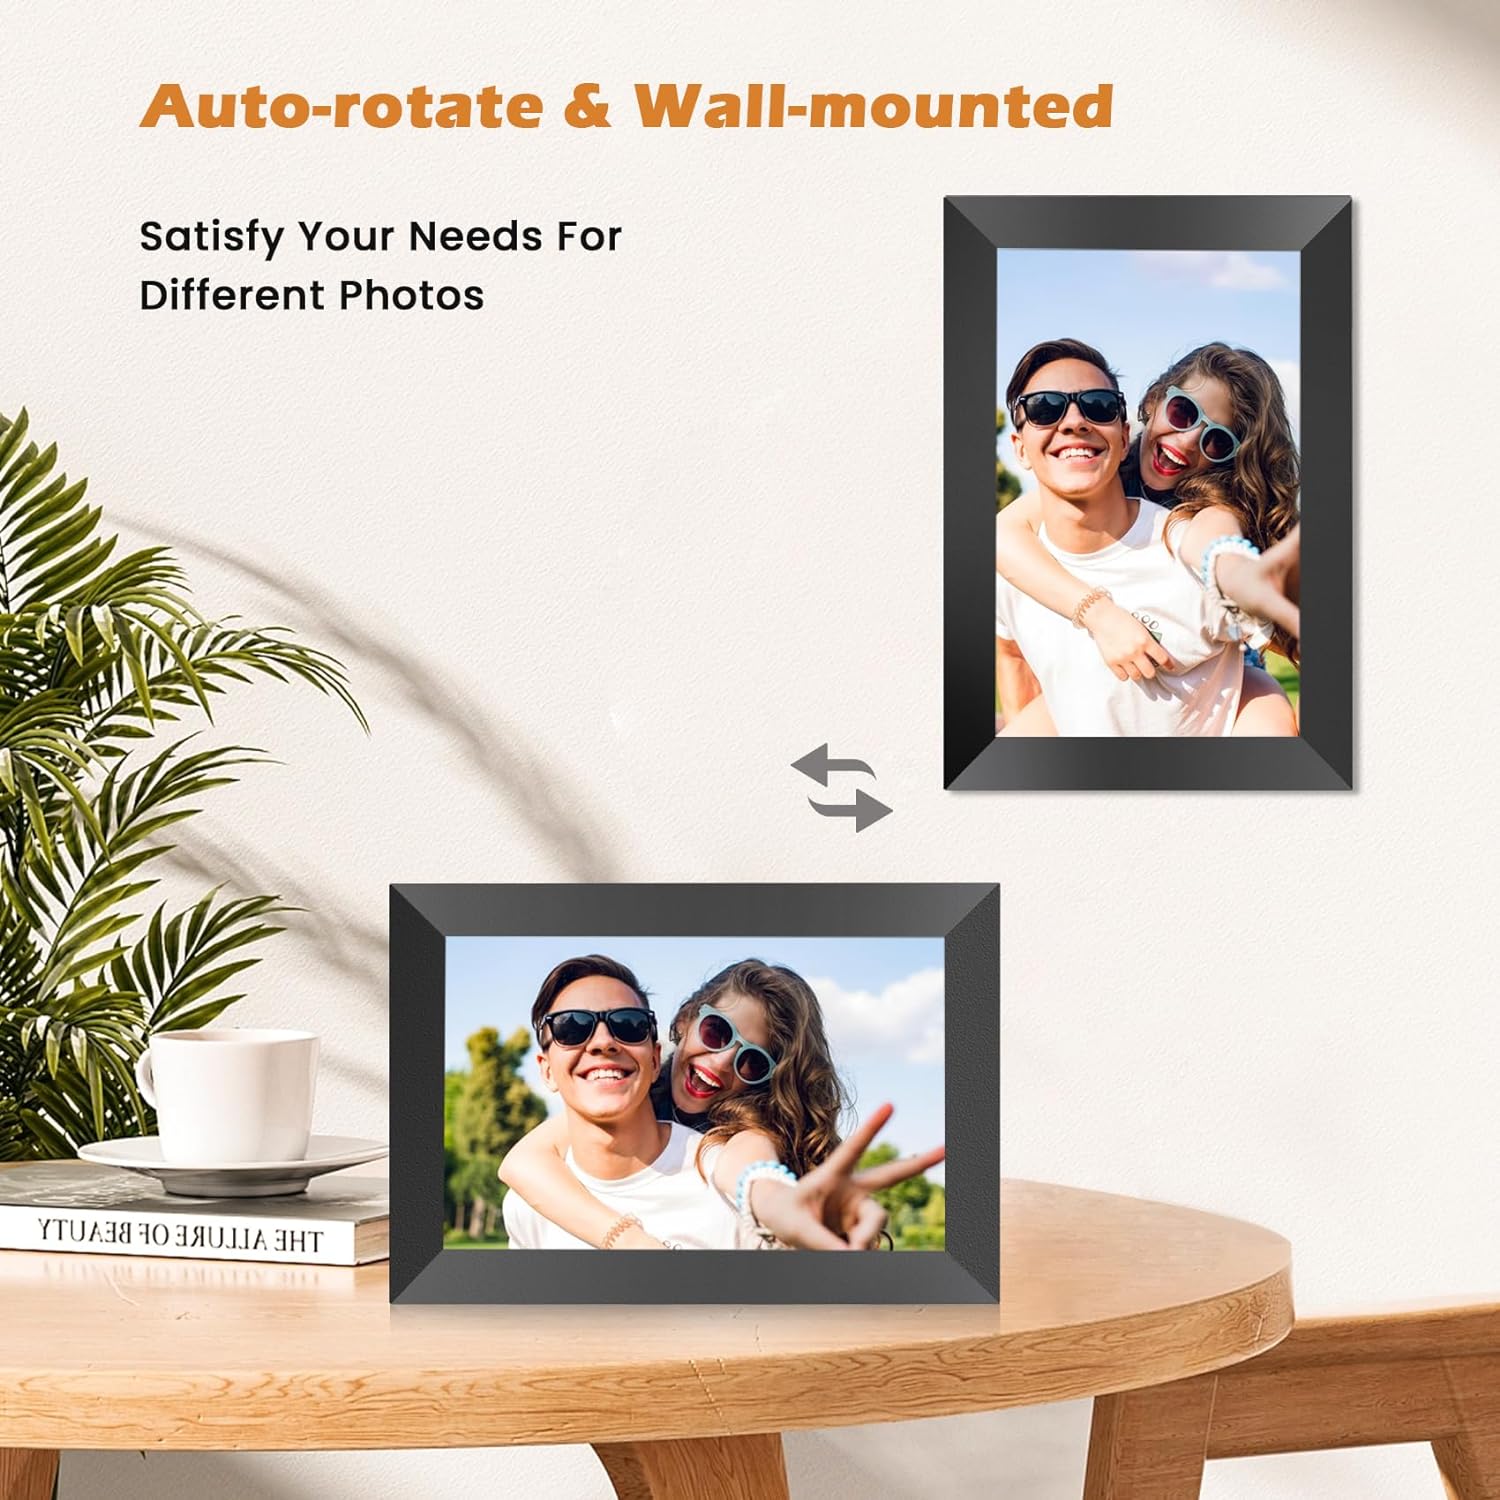 Wonnie 10.1 Inch Wifi Digital Picture Frame Review